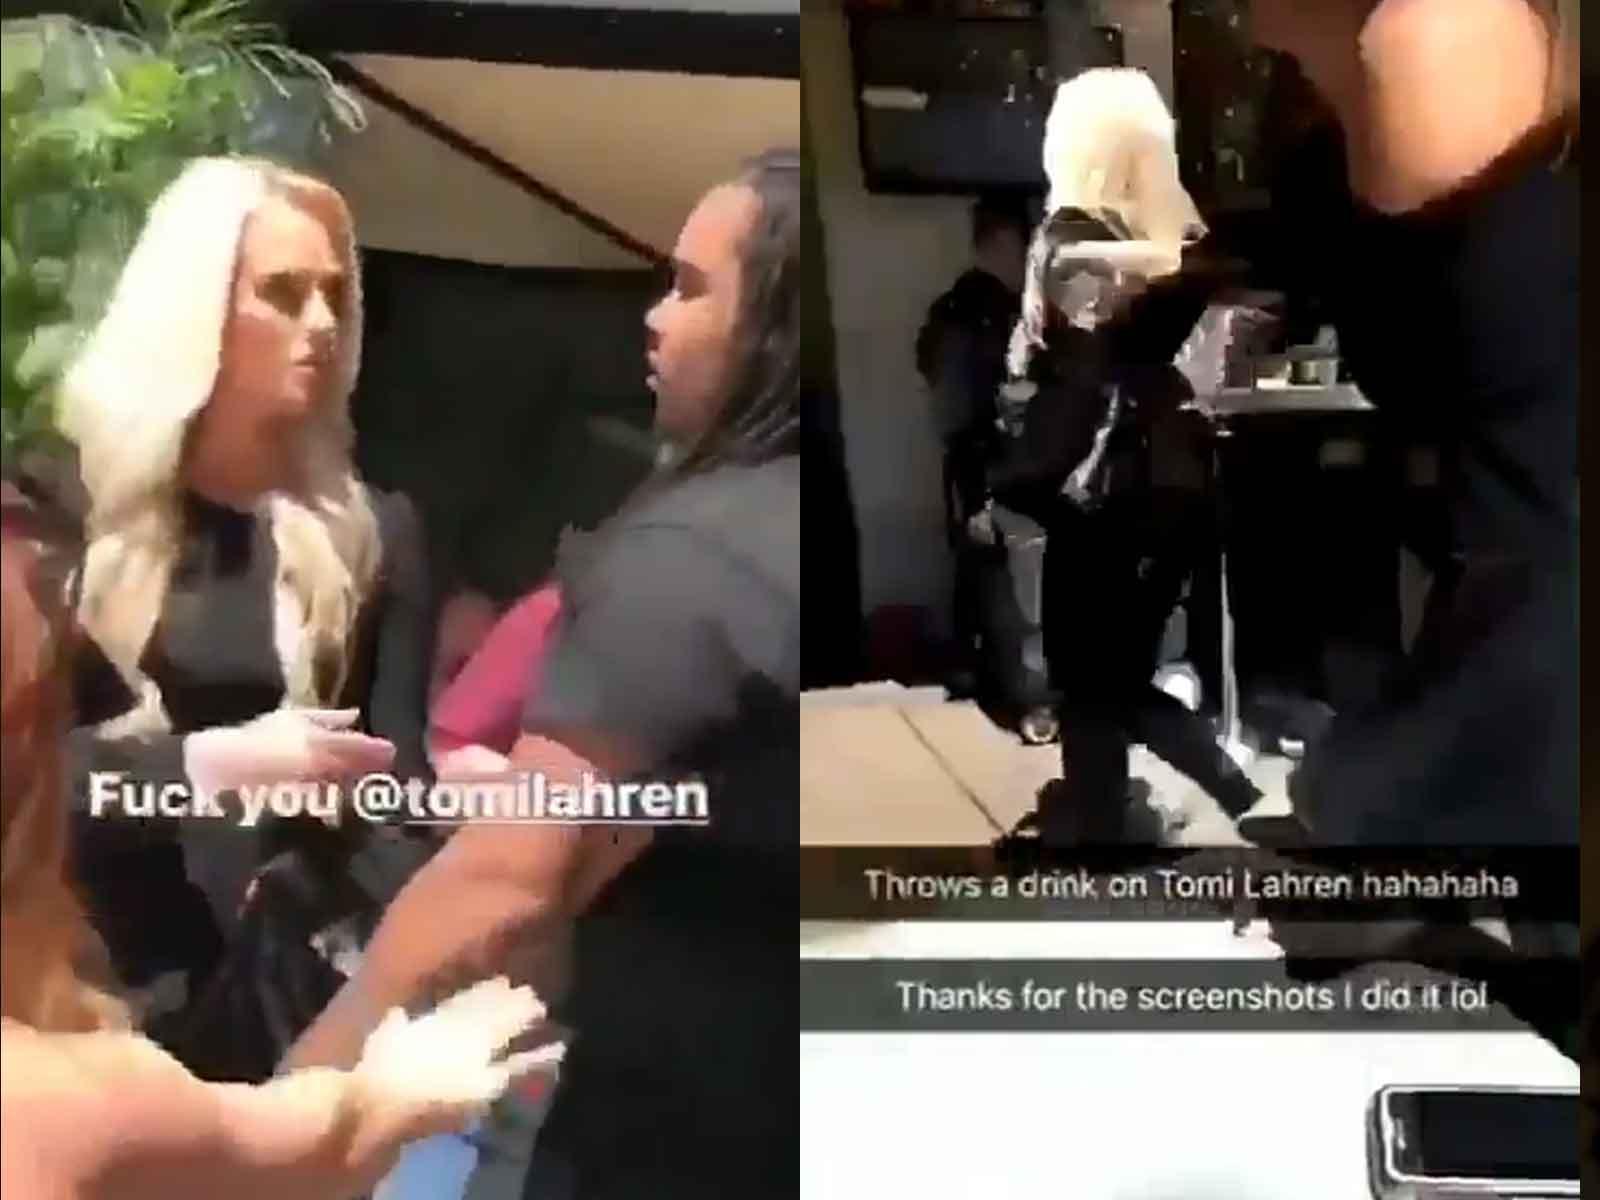 Tomi Lahren’s Mom Squared Off With Hip-Hop Brunch Patrons Who Threw Drink On the TV Host